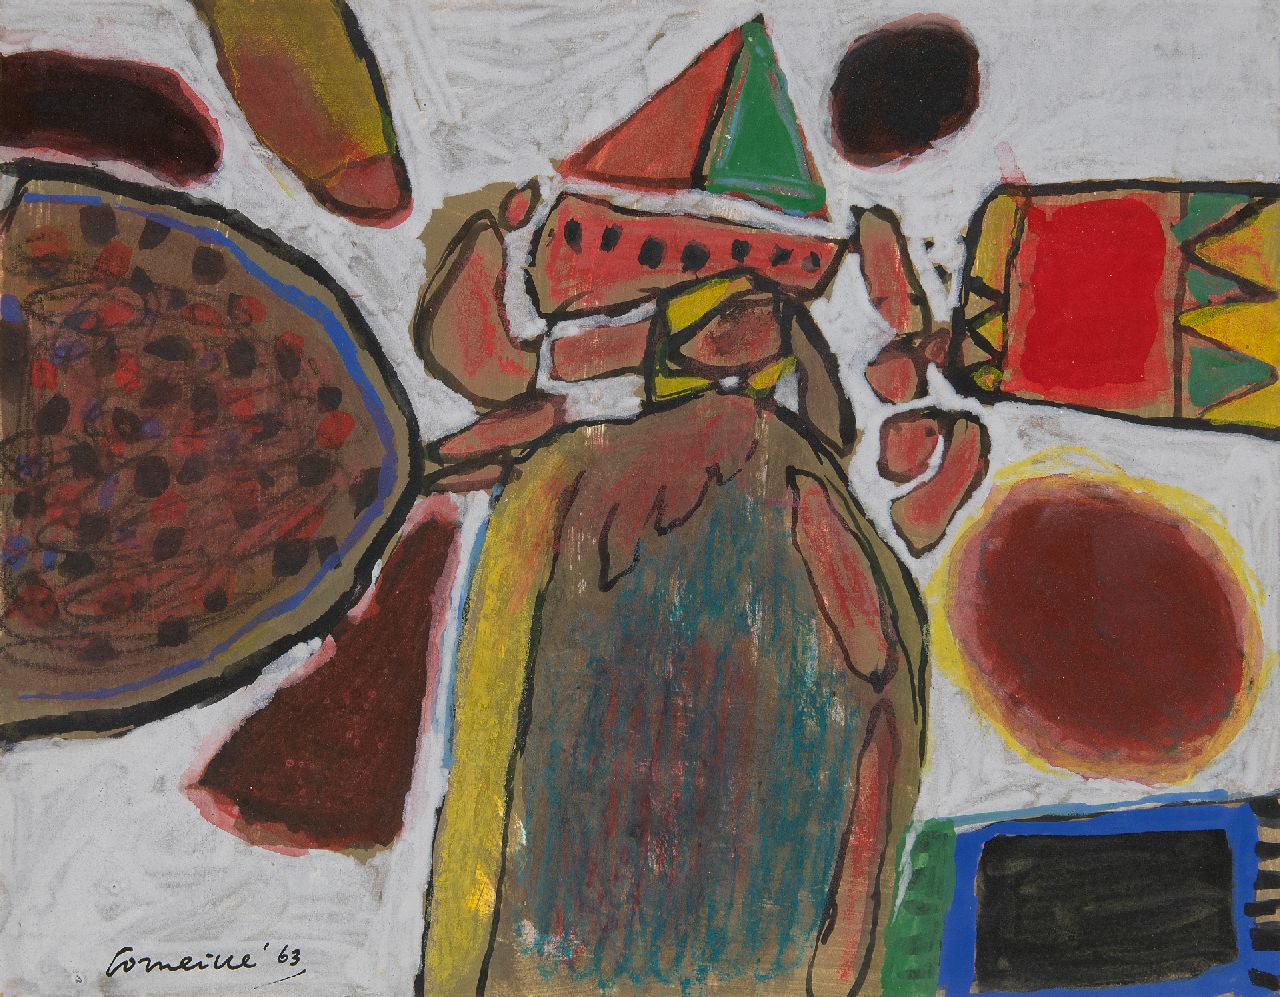 Corneille ('Corneille' Guillaume Beverloo)   | Corneille ('Corneille' Guillaume Beverloo) | Watercolours and drawings offered for sale | La Grande Baigneuse, chalk and gouache on paper 22.9 x 29.7 cm, signed l.l. and dated '63